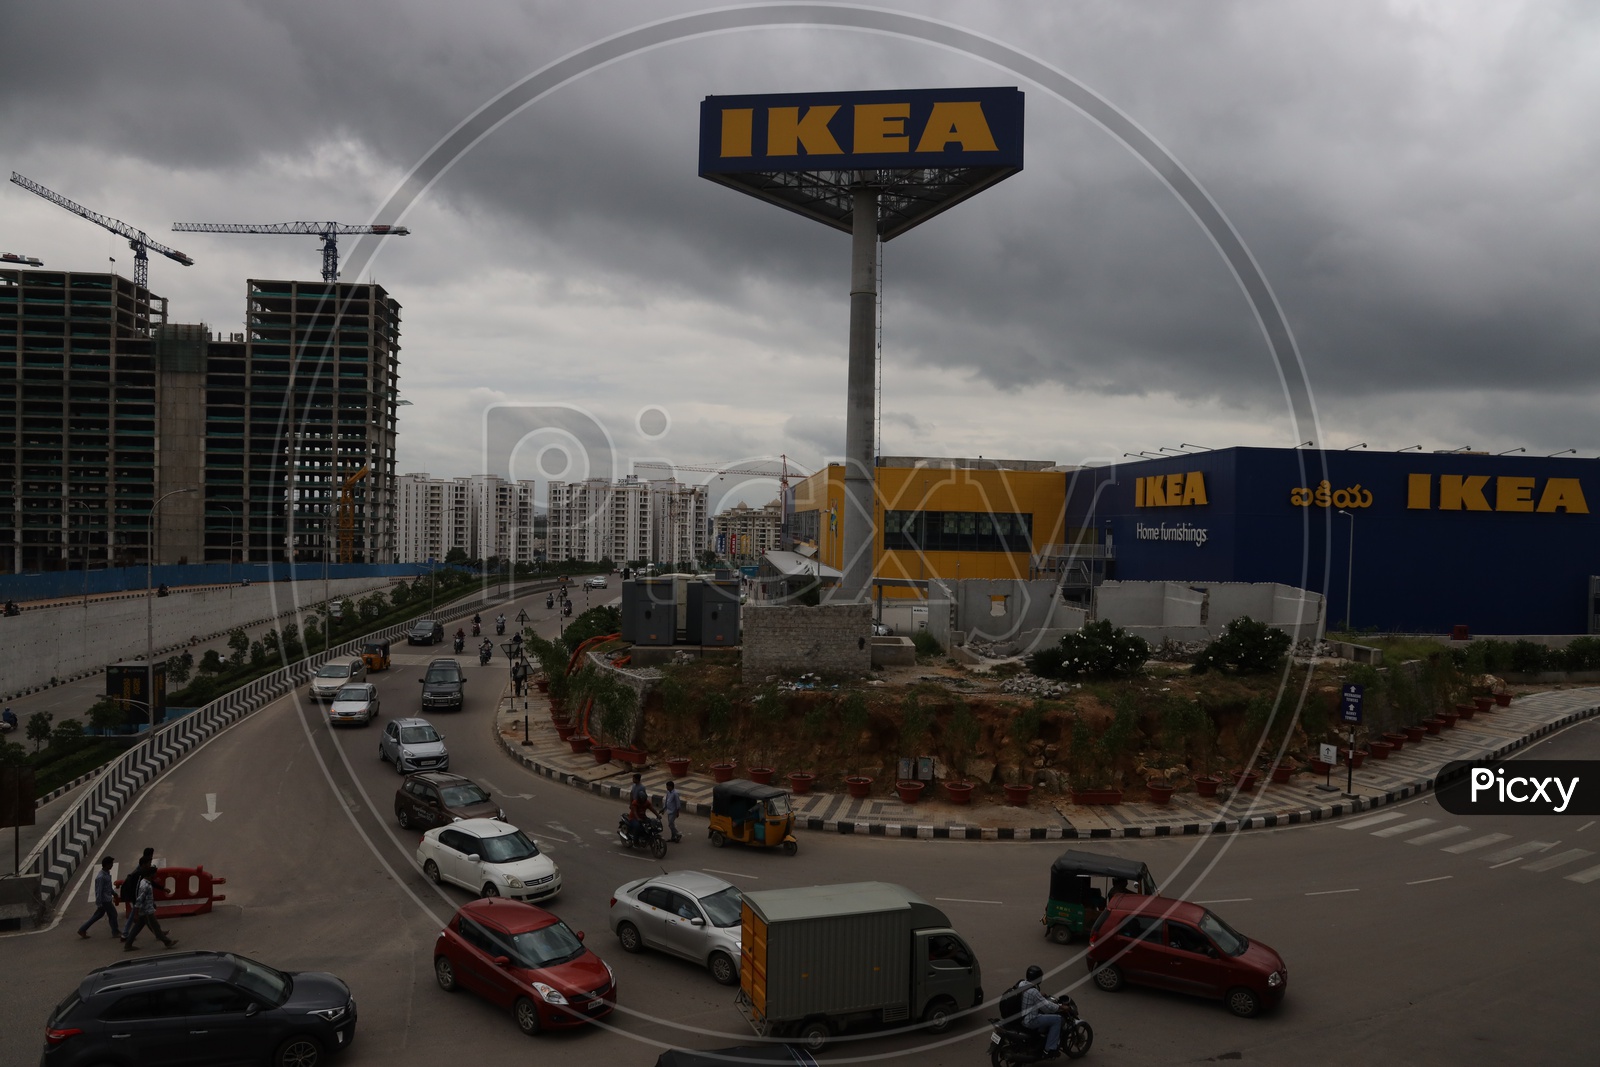 IKEA Store View From Flyover